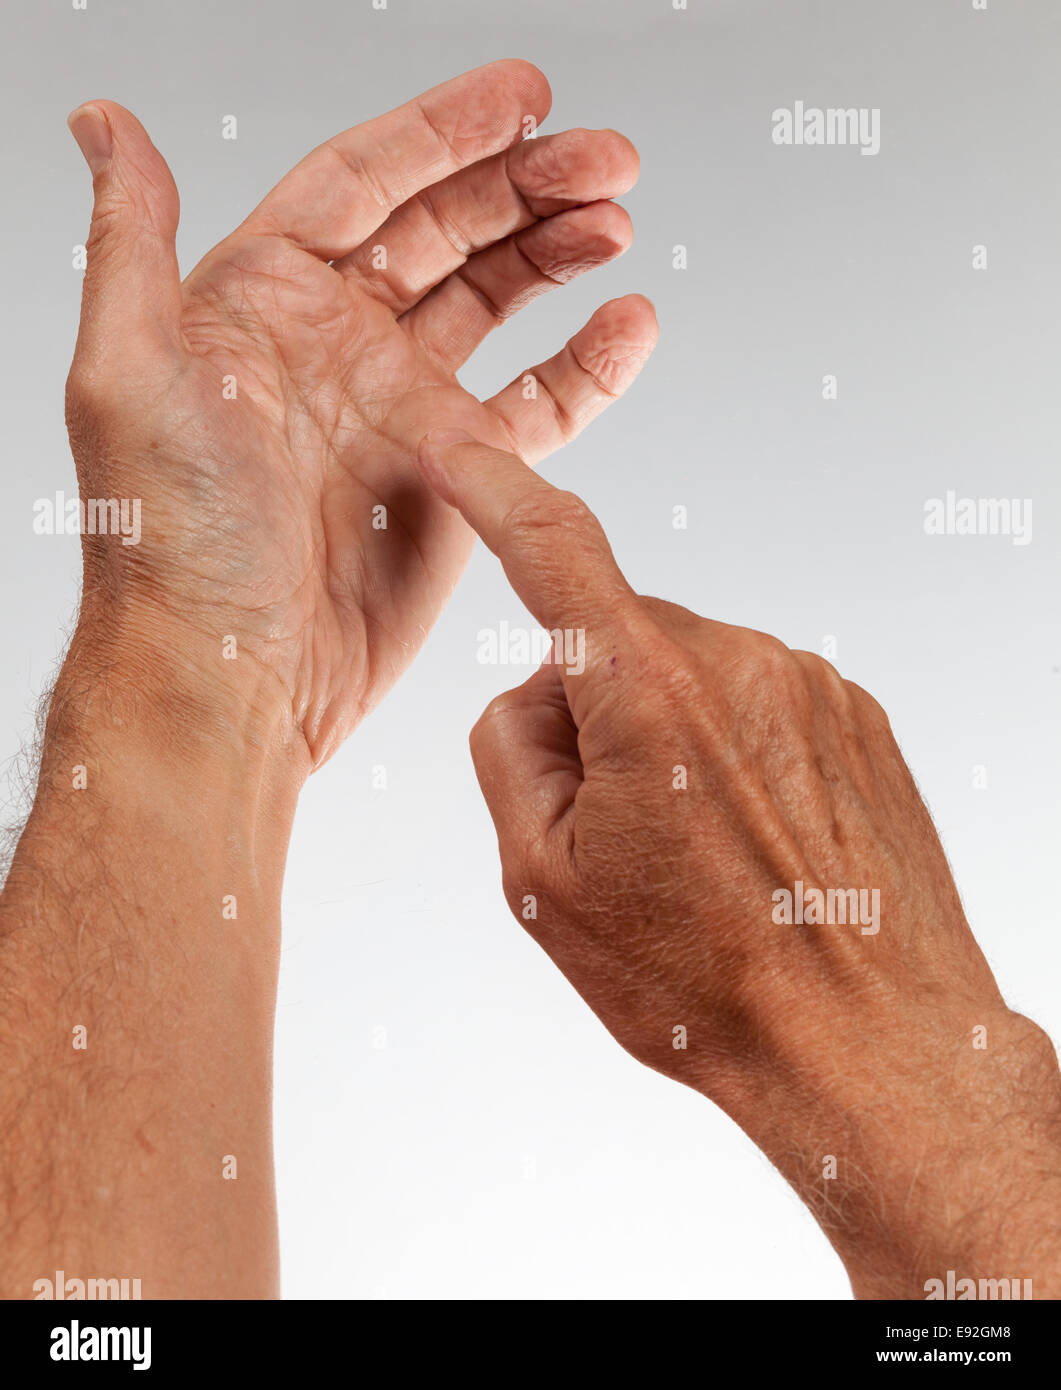 Male hand holding invisible smartphone Stock Photo